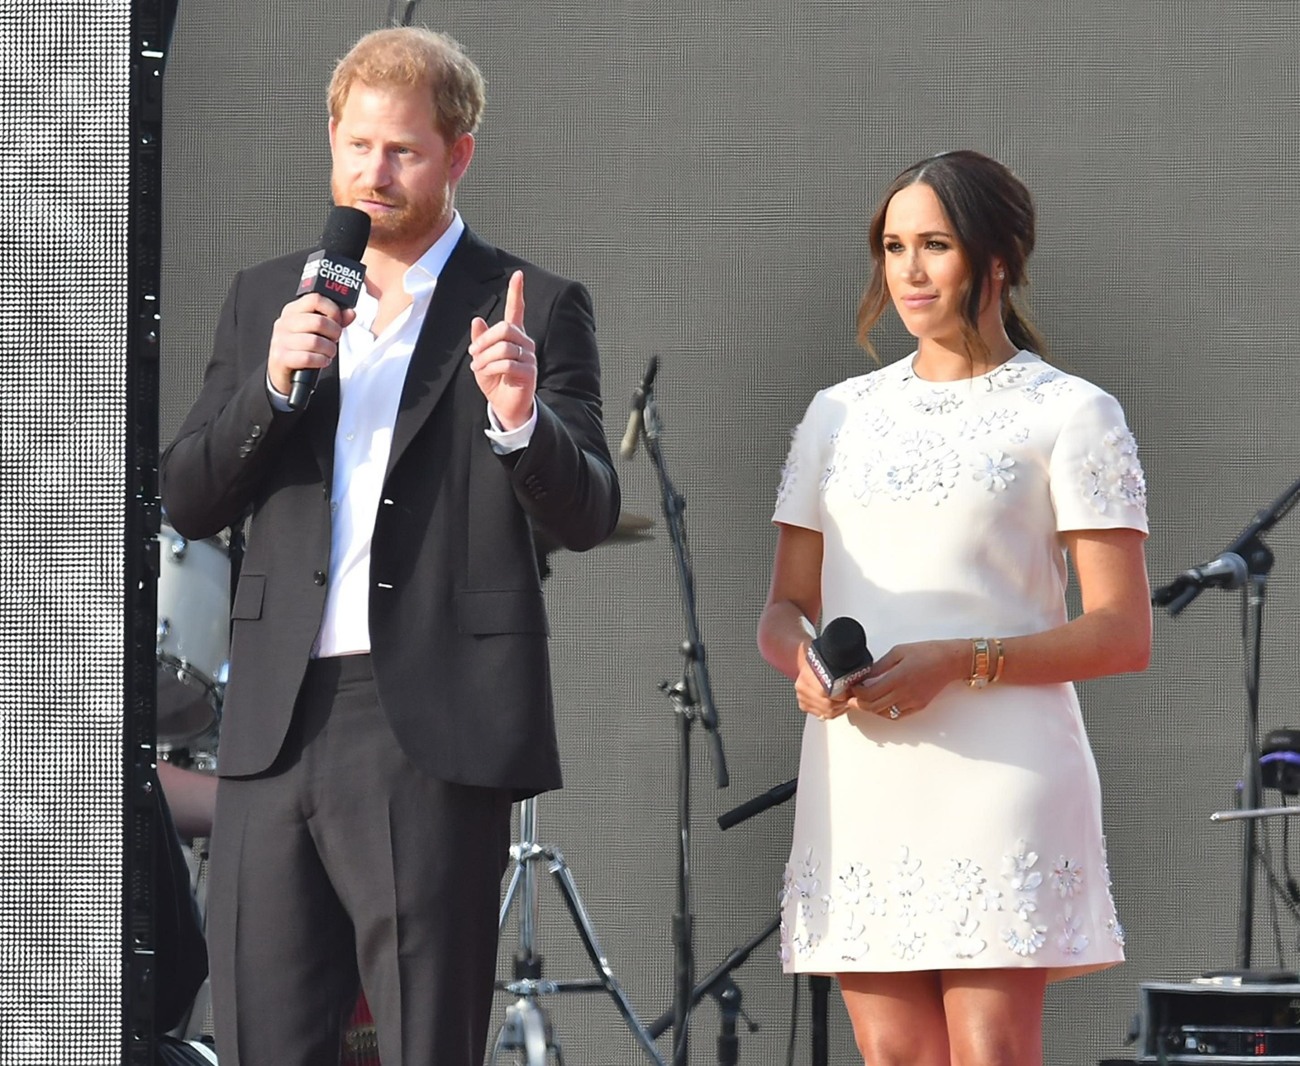 Prince Harry and Meghan Markle speak at the 2021 Global Citizen Live Festival